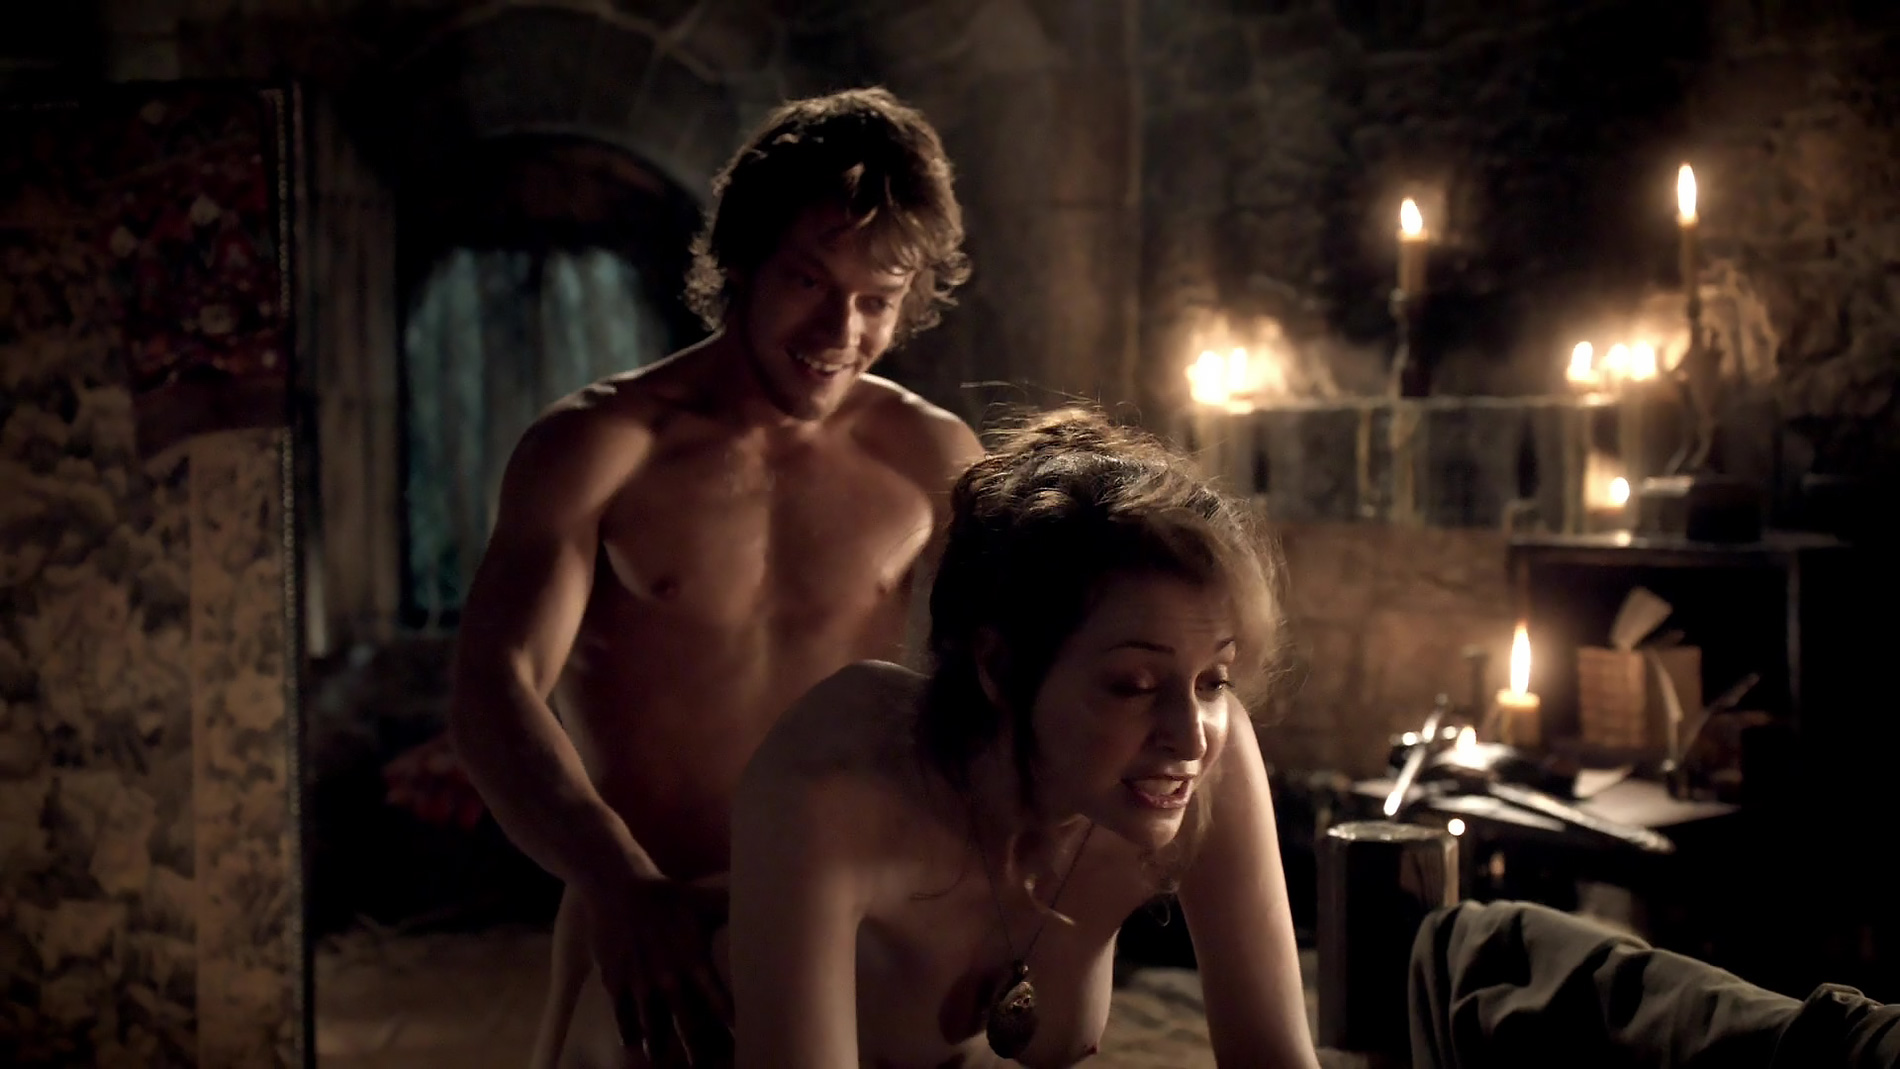 Esme Bianco Doggy Sex From Game Of Thrones - ScandalPost